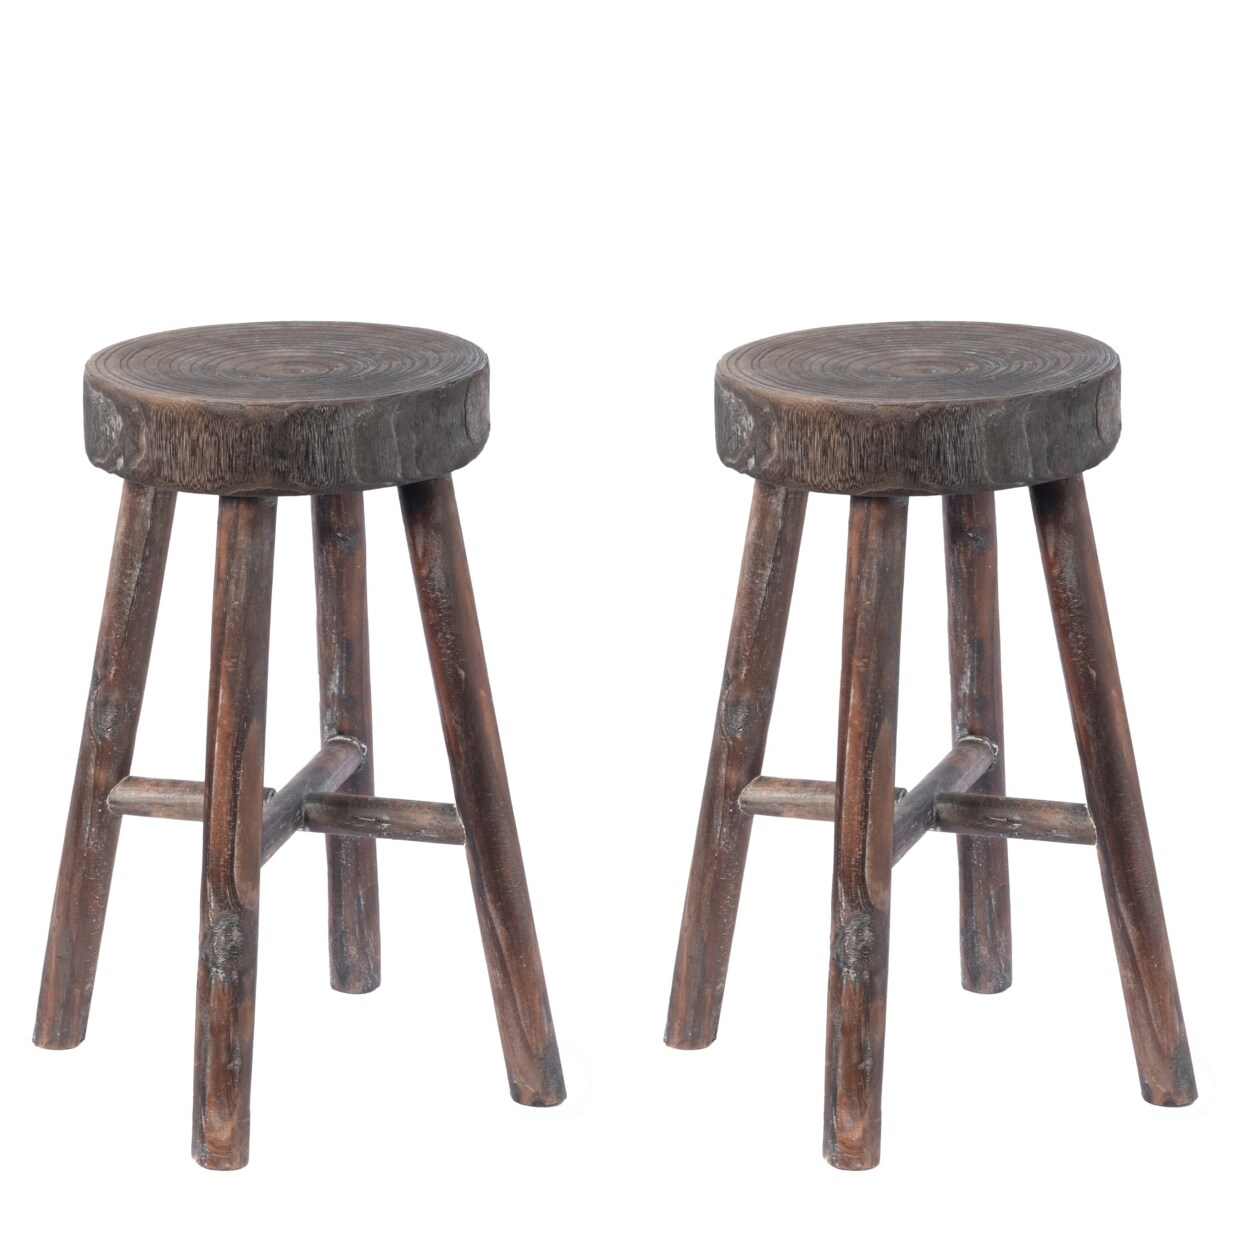 Vintiquewise Antique Round Wooden Chair Log Cabin Stools Set of 2